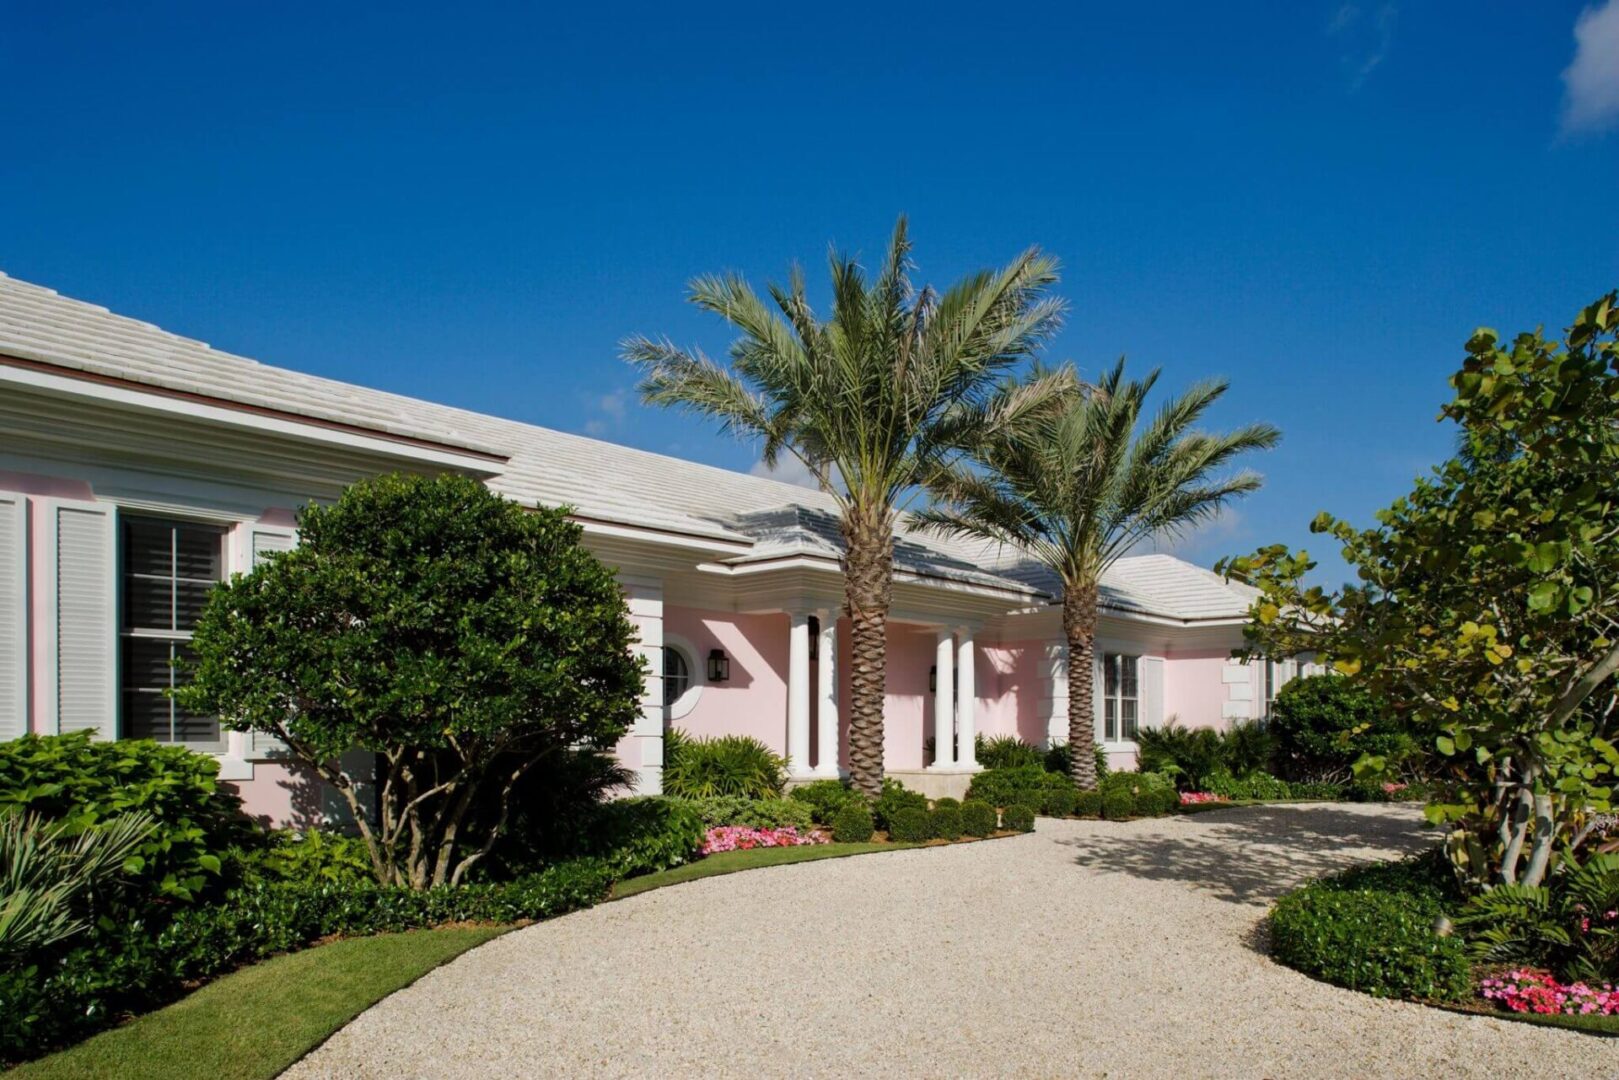 A large driveway with palm trees and bushes.